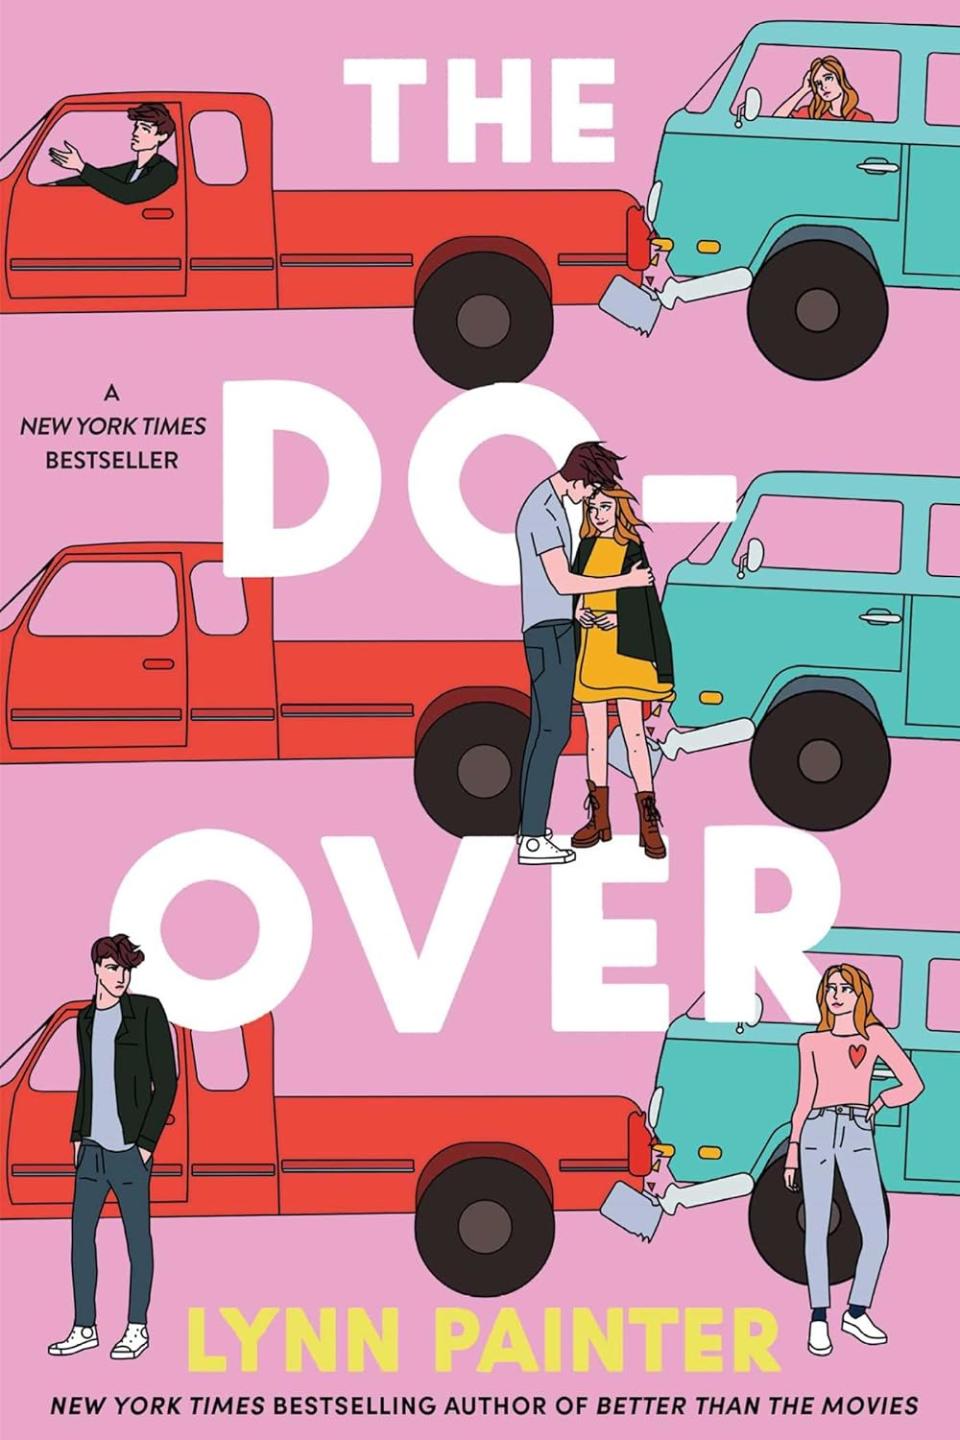 "The Do-Over"